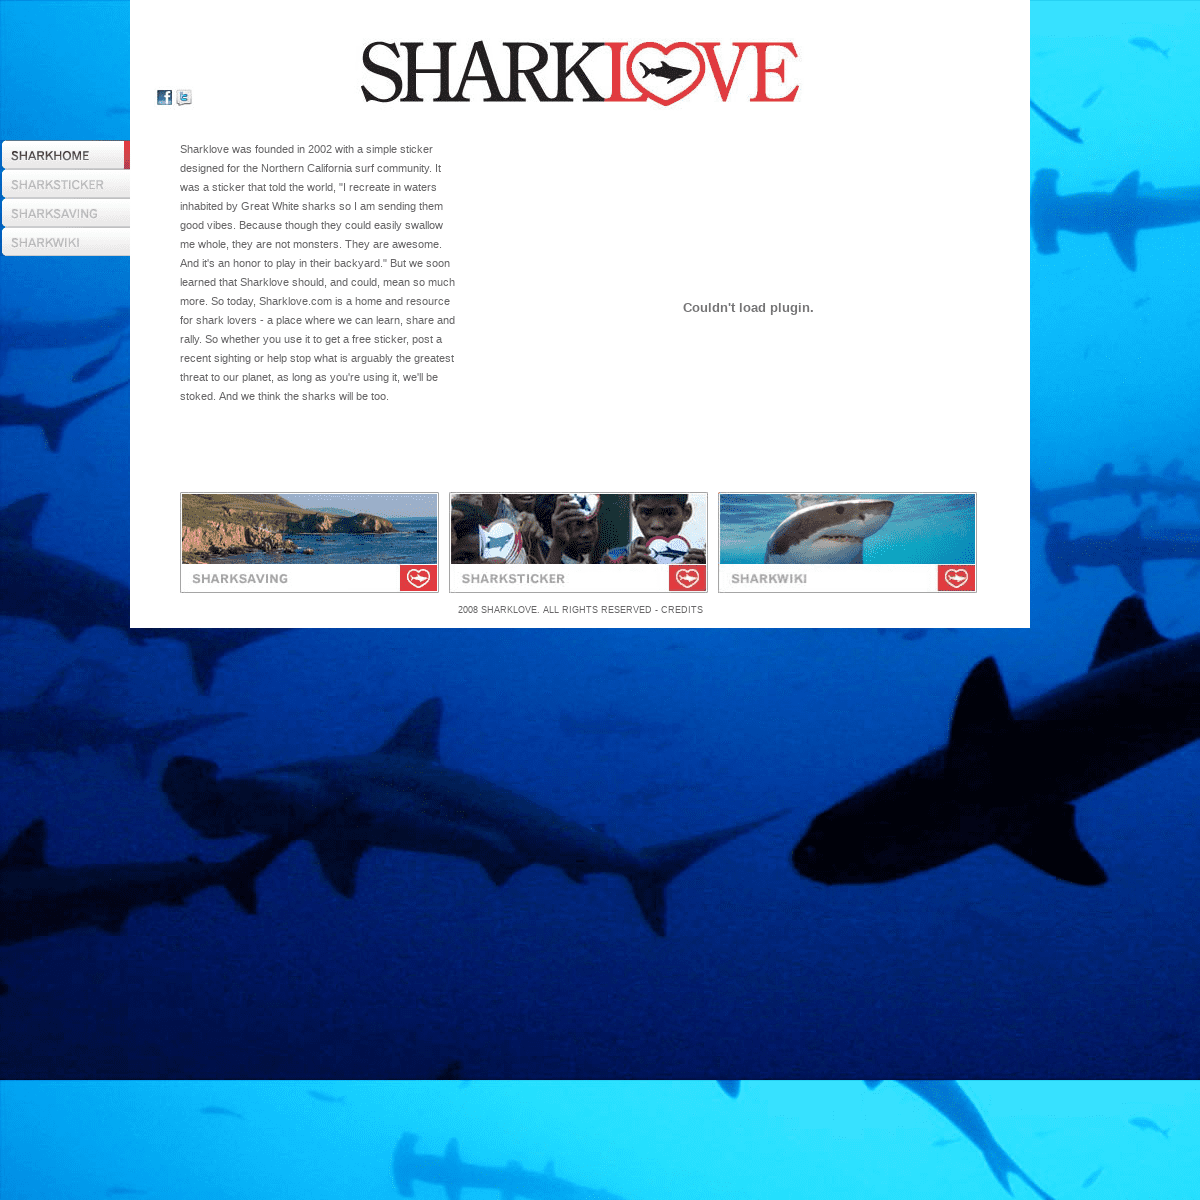 SHARKLOVE® The home and resource for shark lovers - a place where we can learn, share and rally.